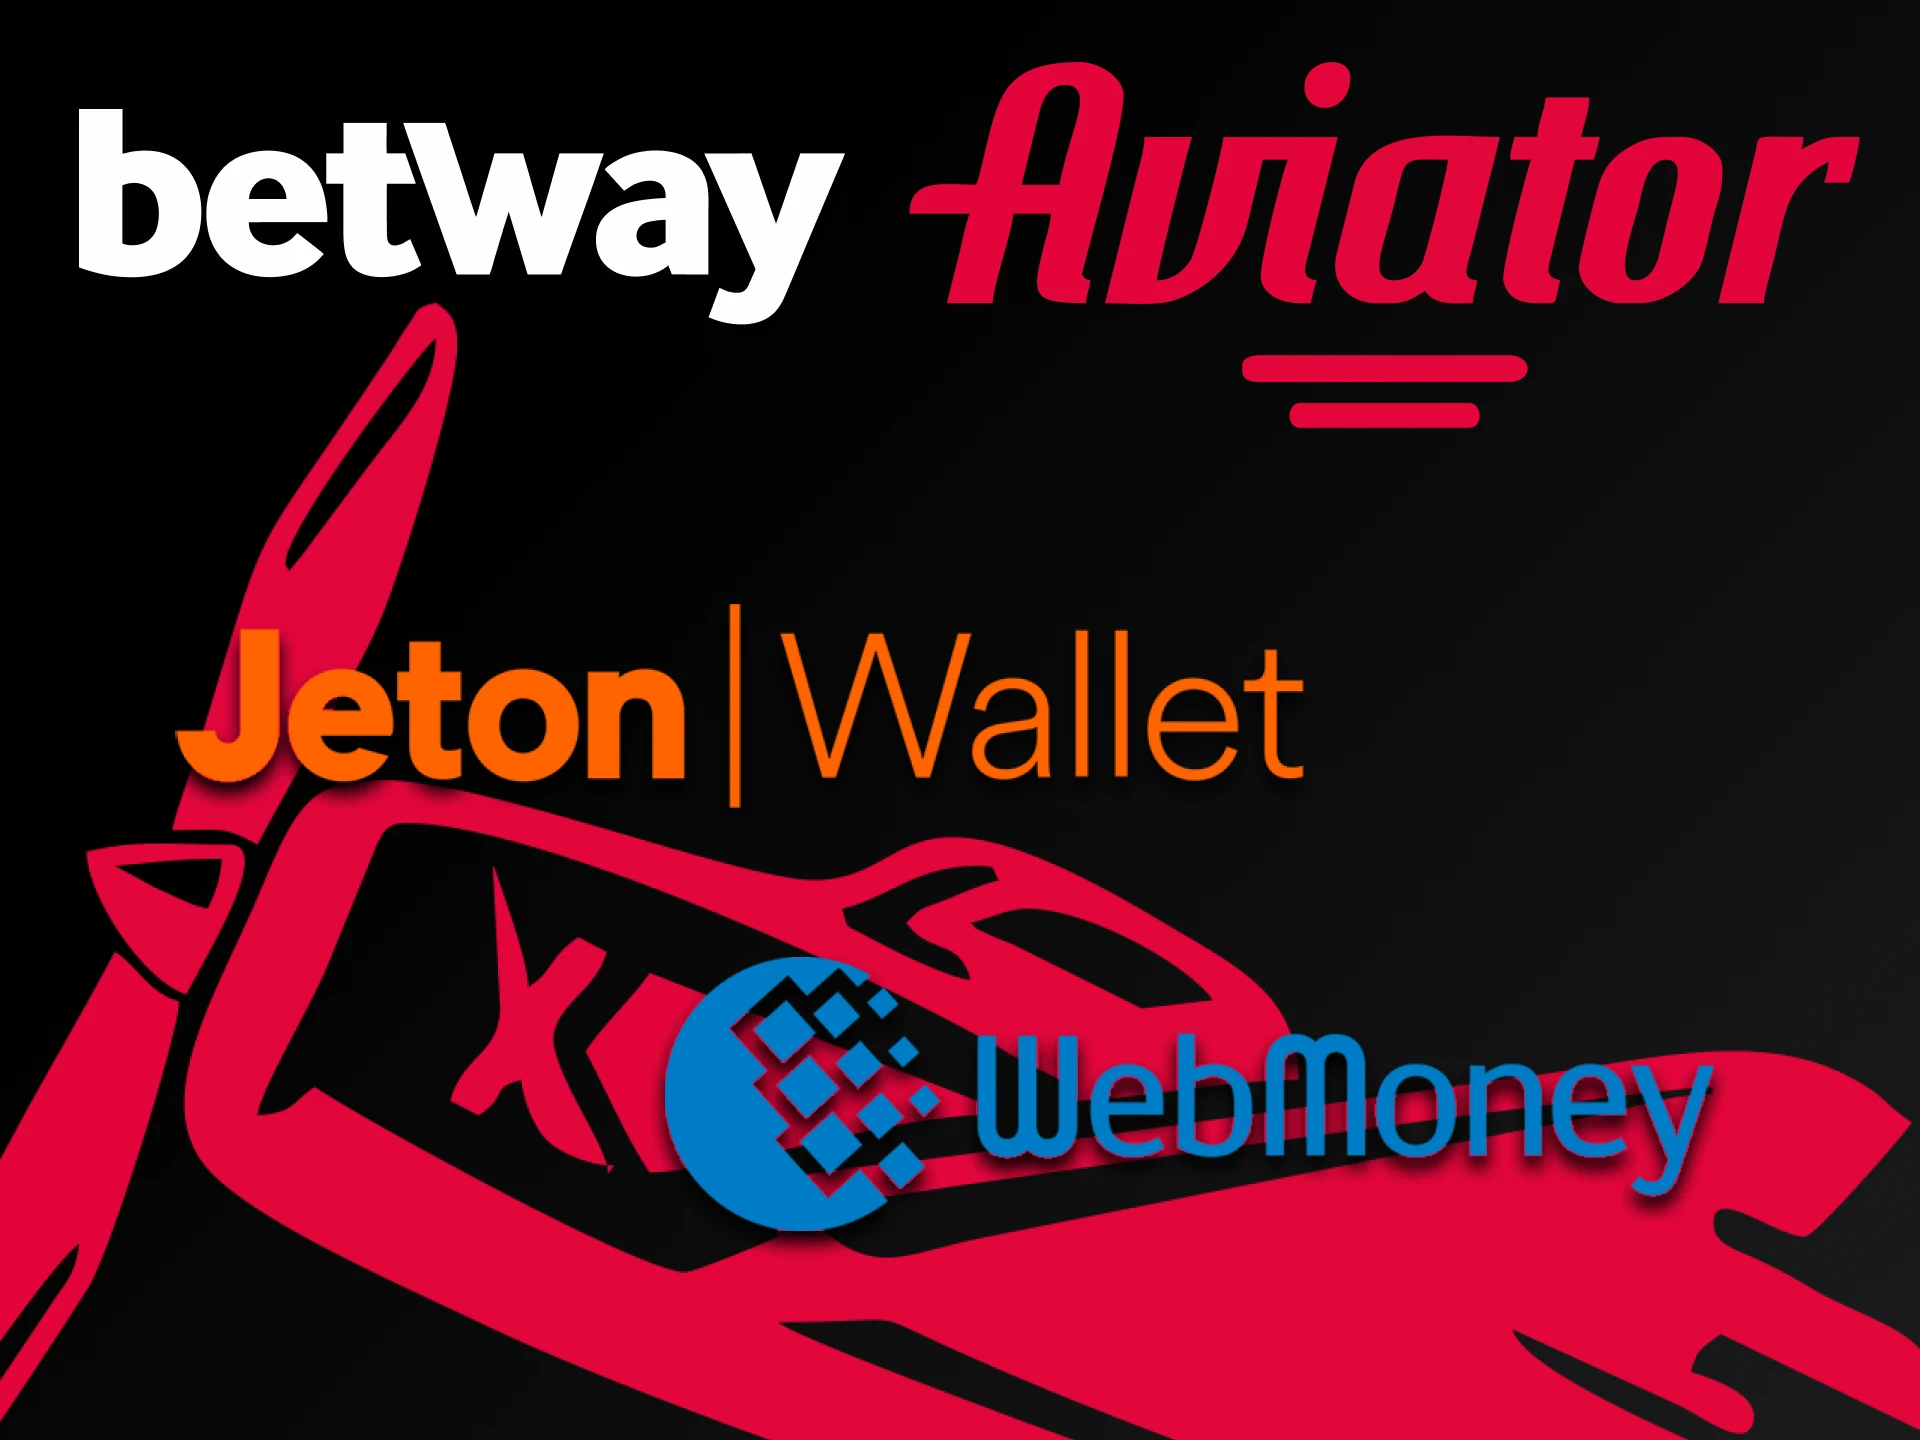 Find out about withdrawal methods for the game Aviator from Betway.